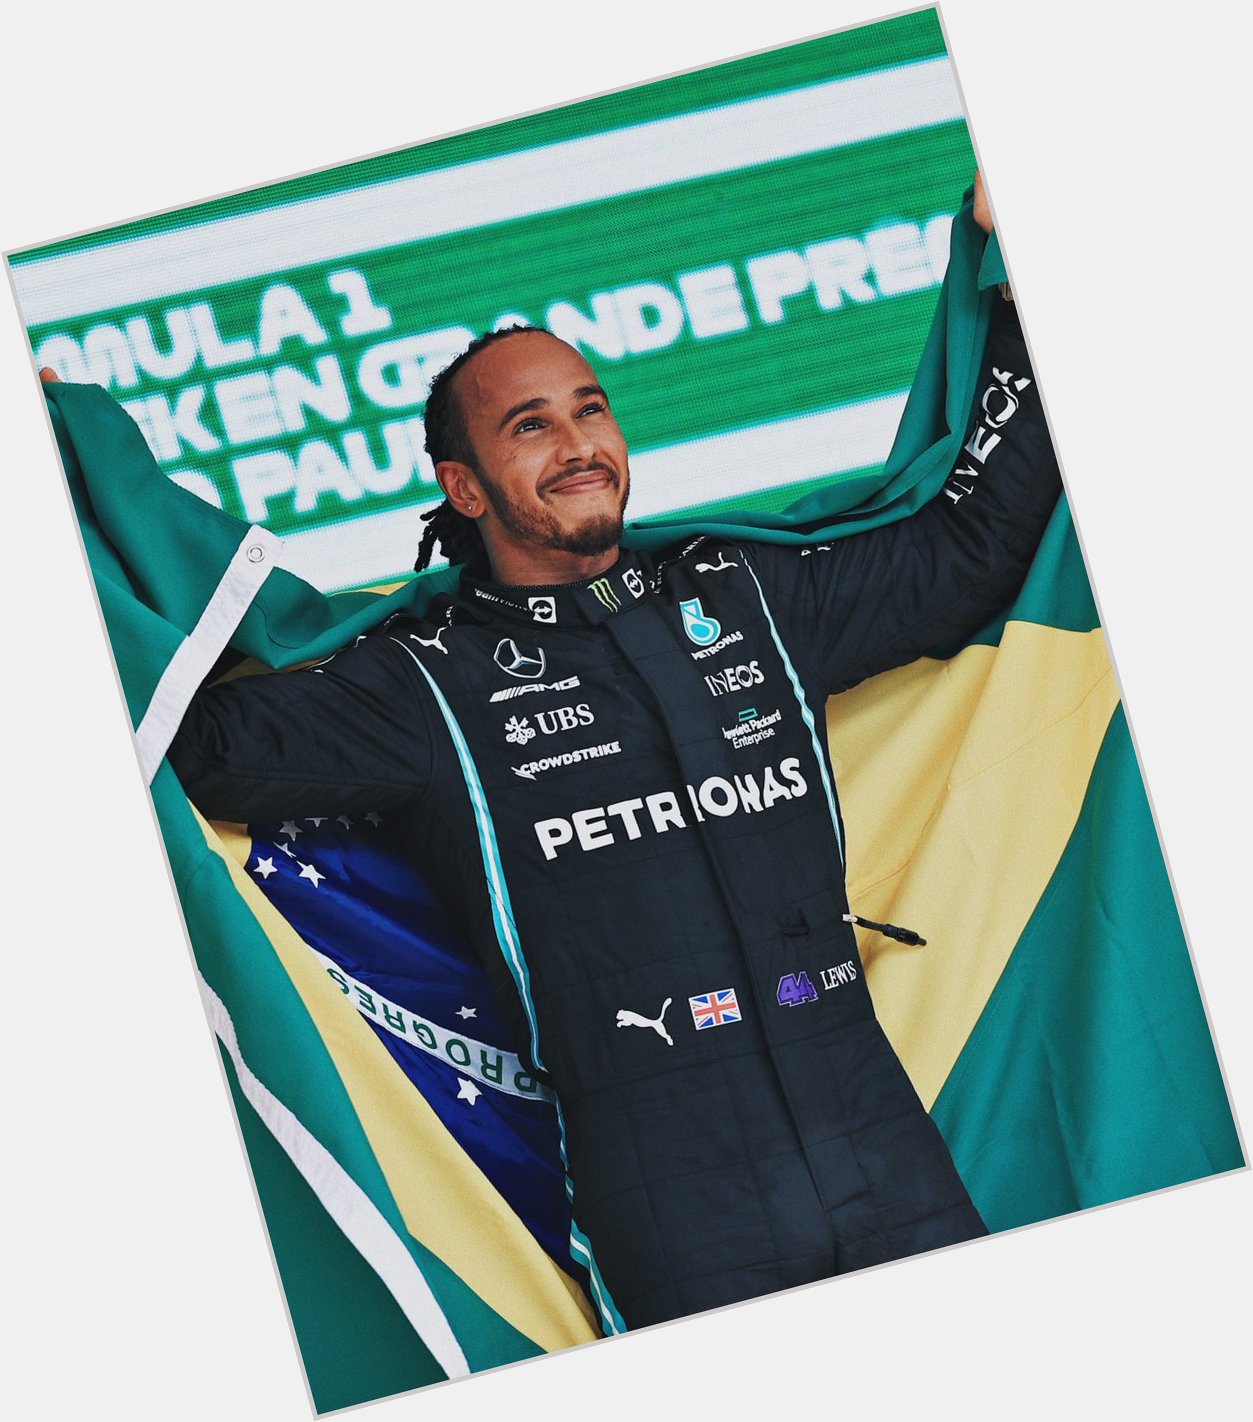 Happy birthday to the one and only Sir Lewis Hamilton   